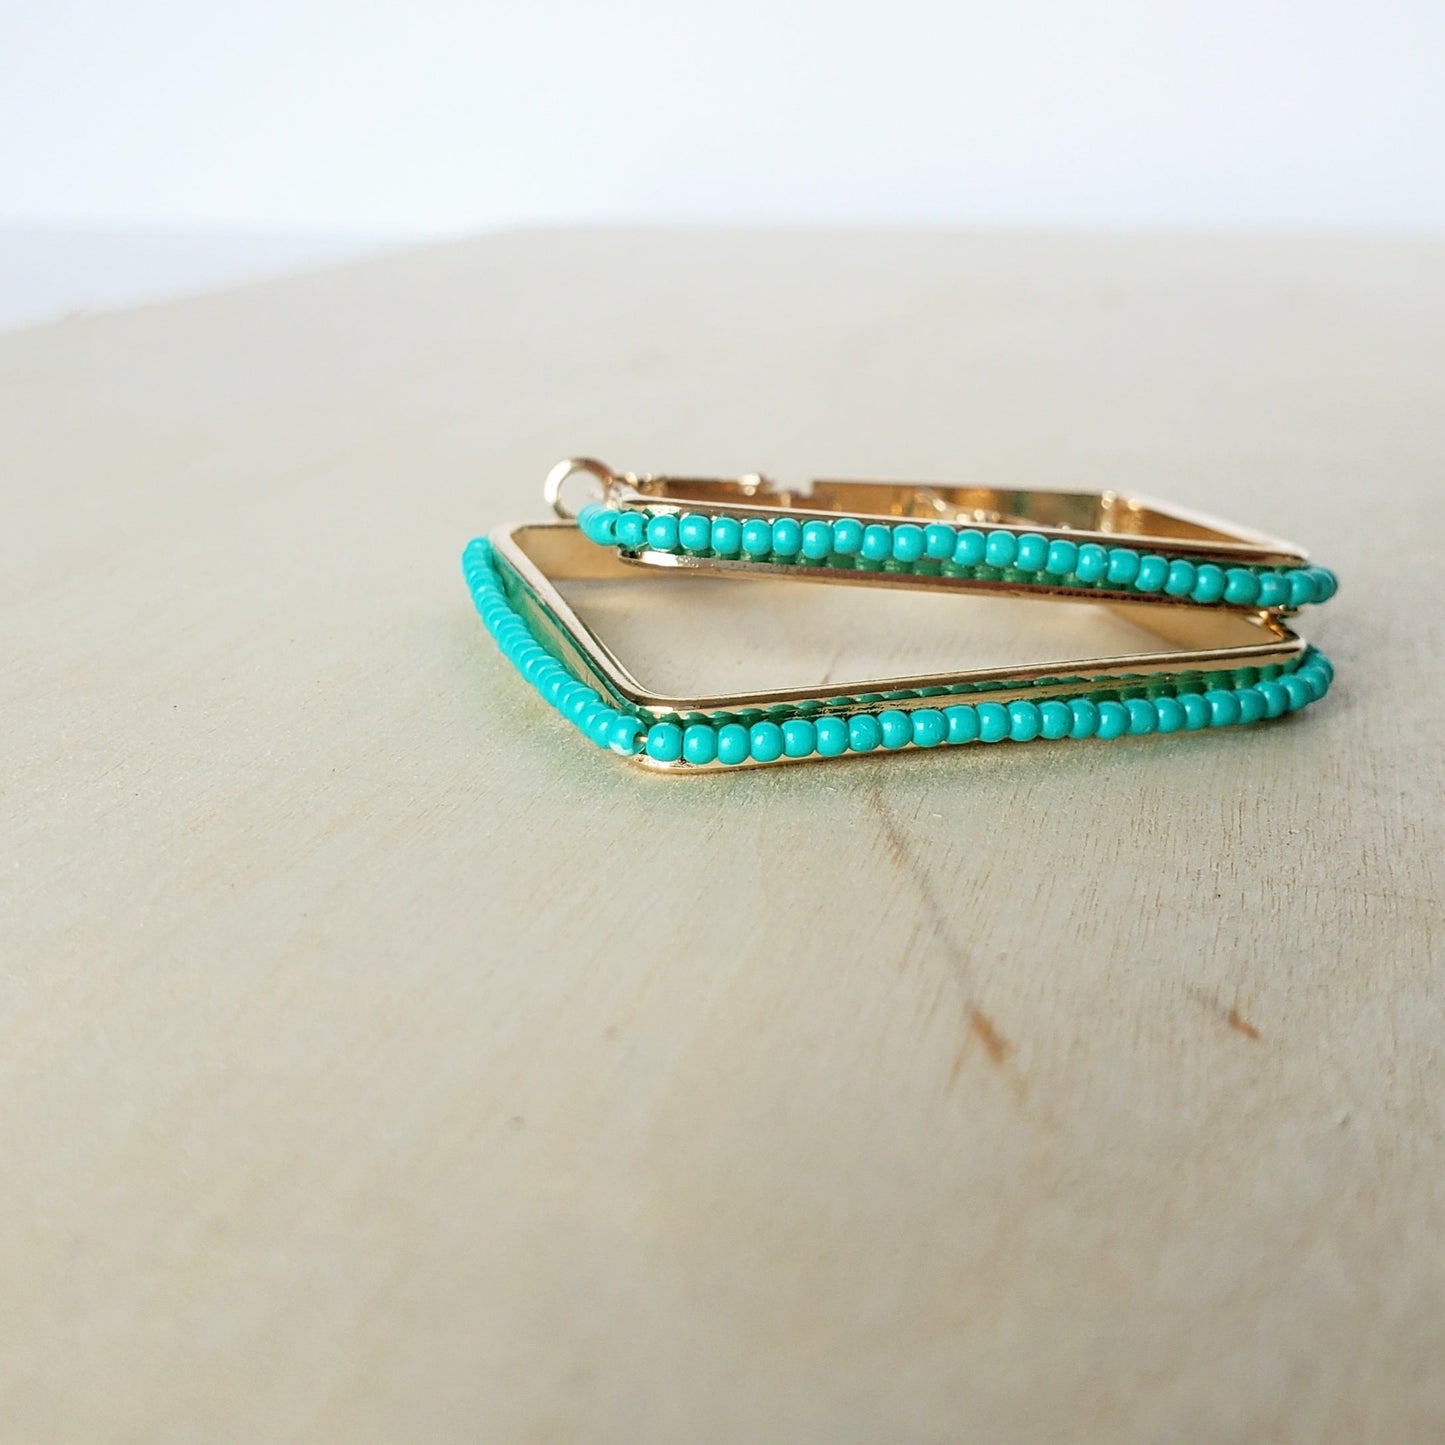 a pair of gold earrings with turquoise seed beads wrapped around the 2 inch square earrings, sit stacked on a light wood surface against a white wall